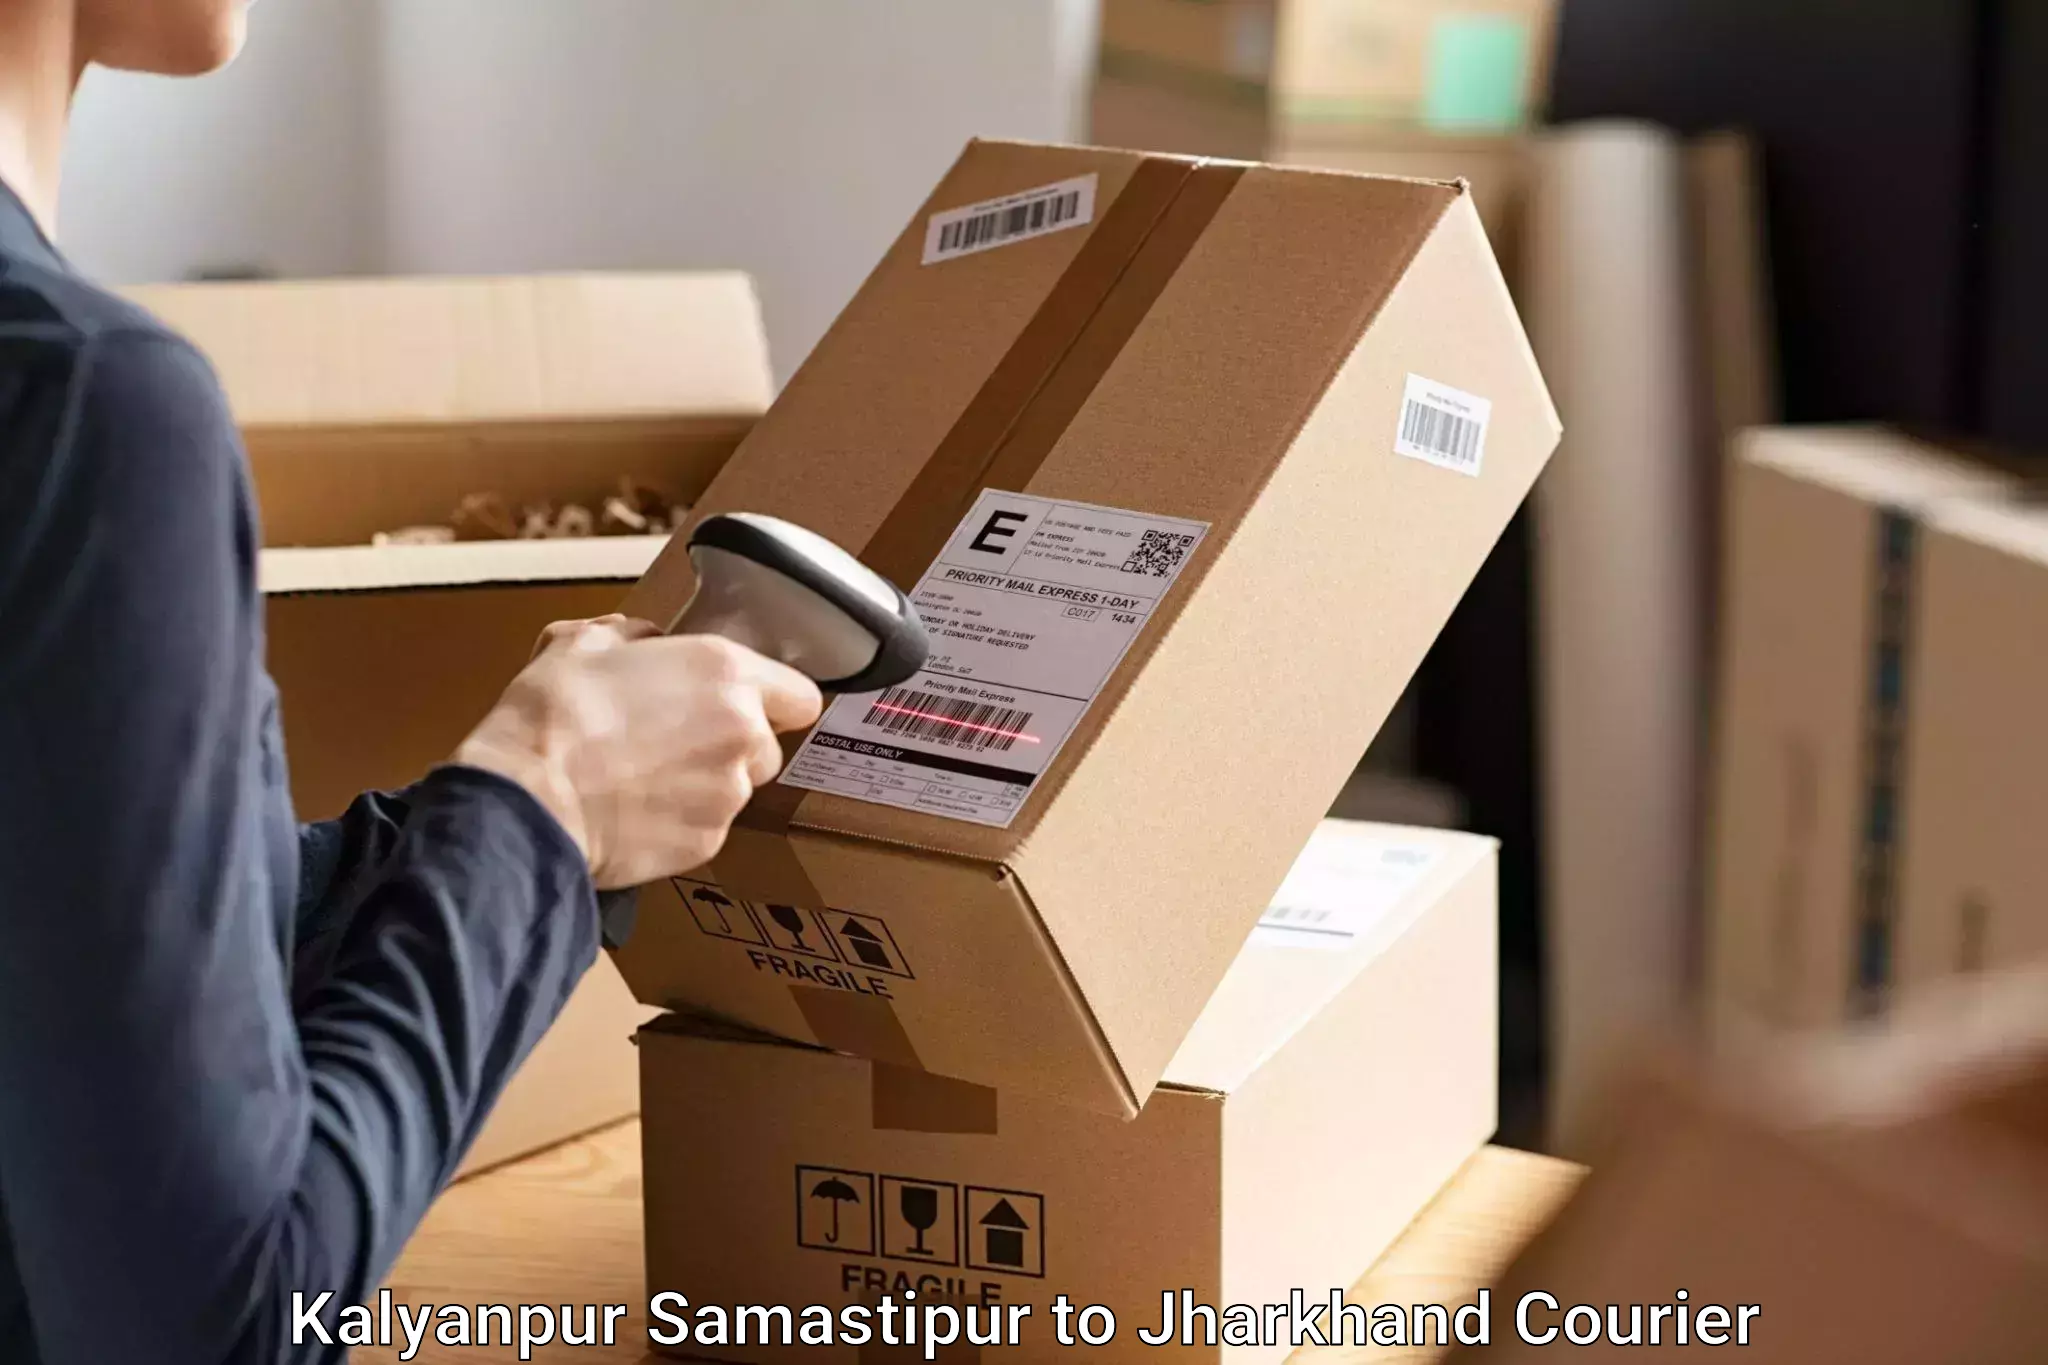 Baggage delivery planning in Kalyanpur Samastipur to Dhalbhumgarh